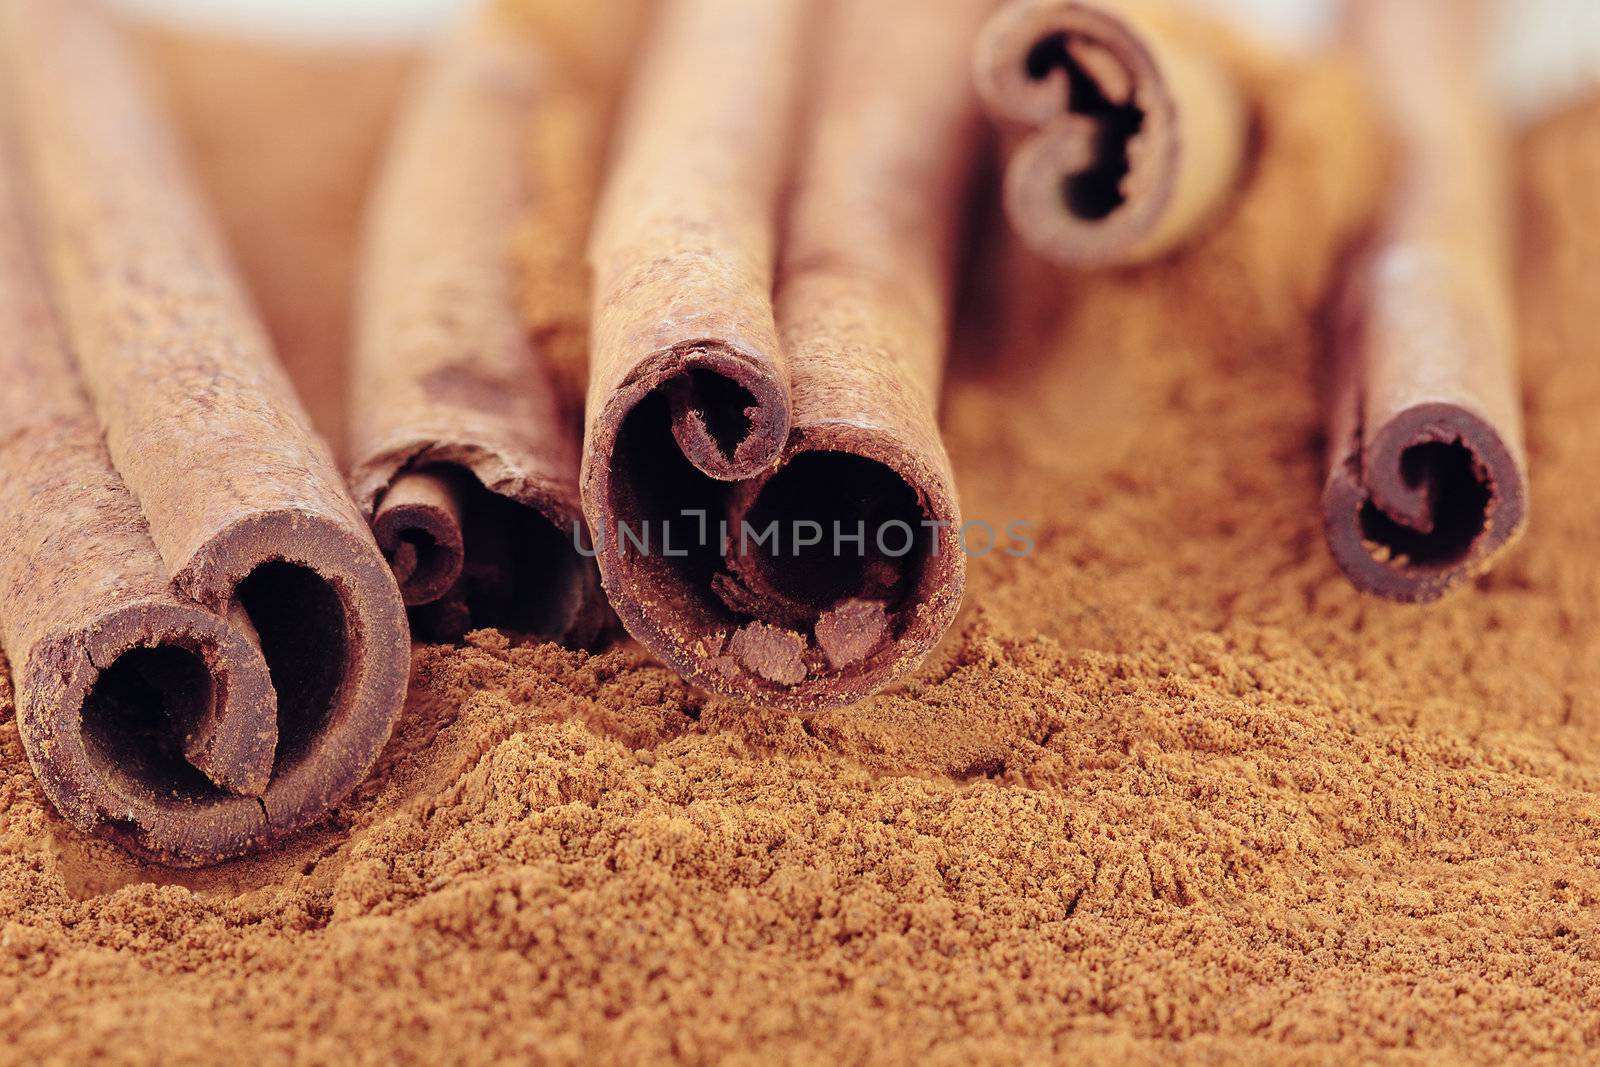 Cinnamon bark and ground cinnamon. Selective focus with extreme shallow DOF. Some blur on lower portion of image.